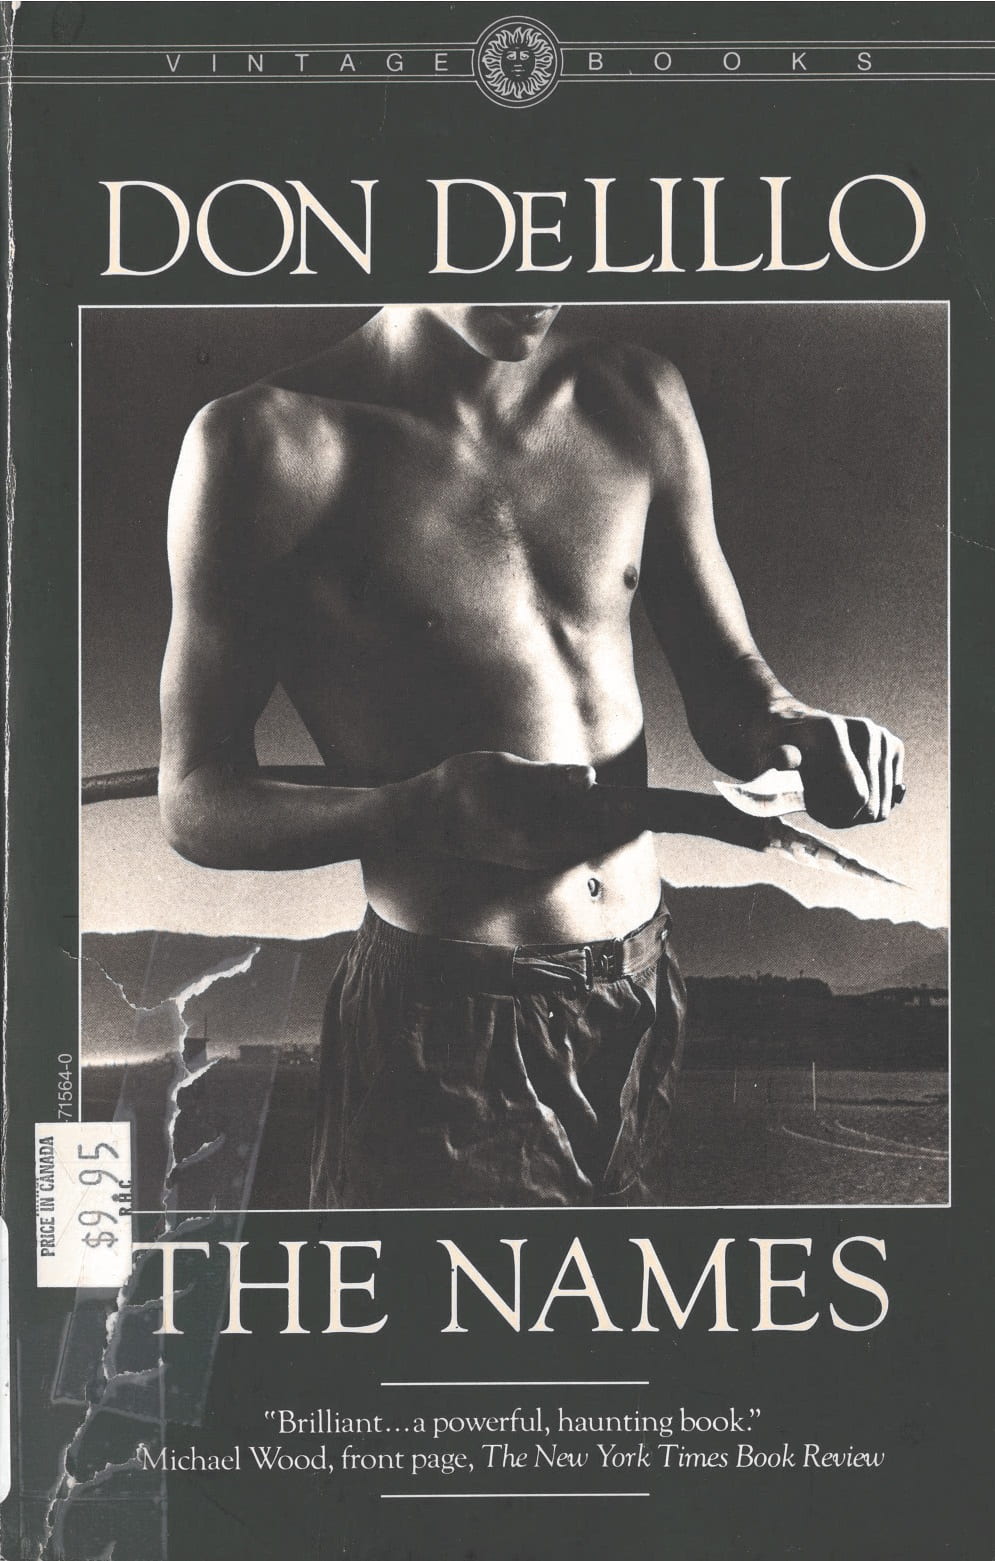 Cover of The Names by Don DeLillo. A shirtless man holds a stick that he is sharpening into a spear.